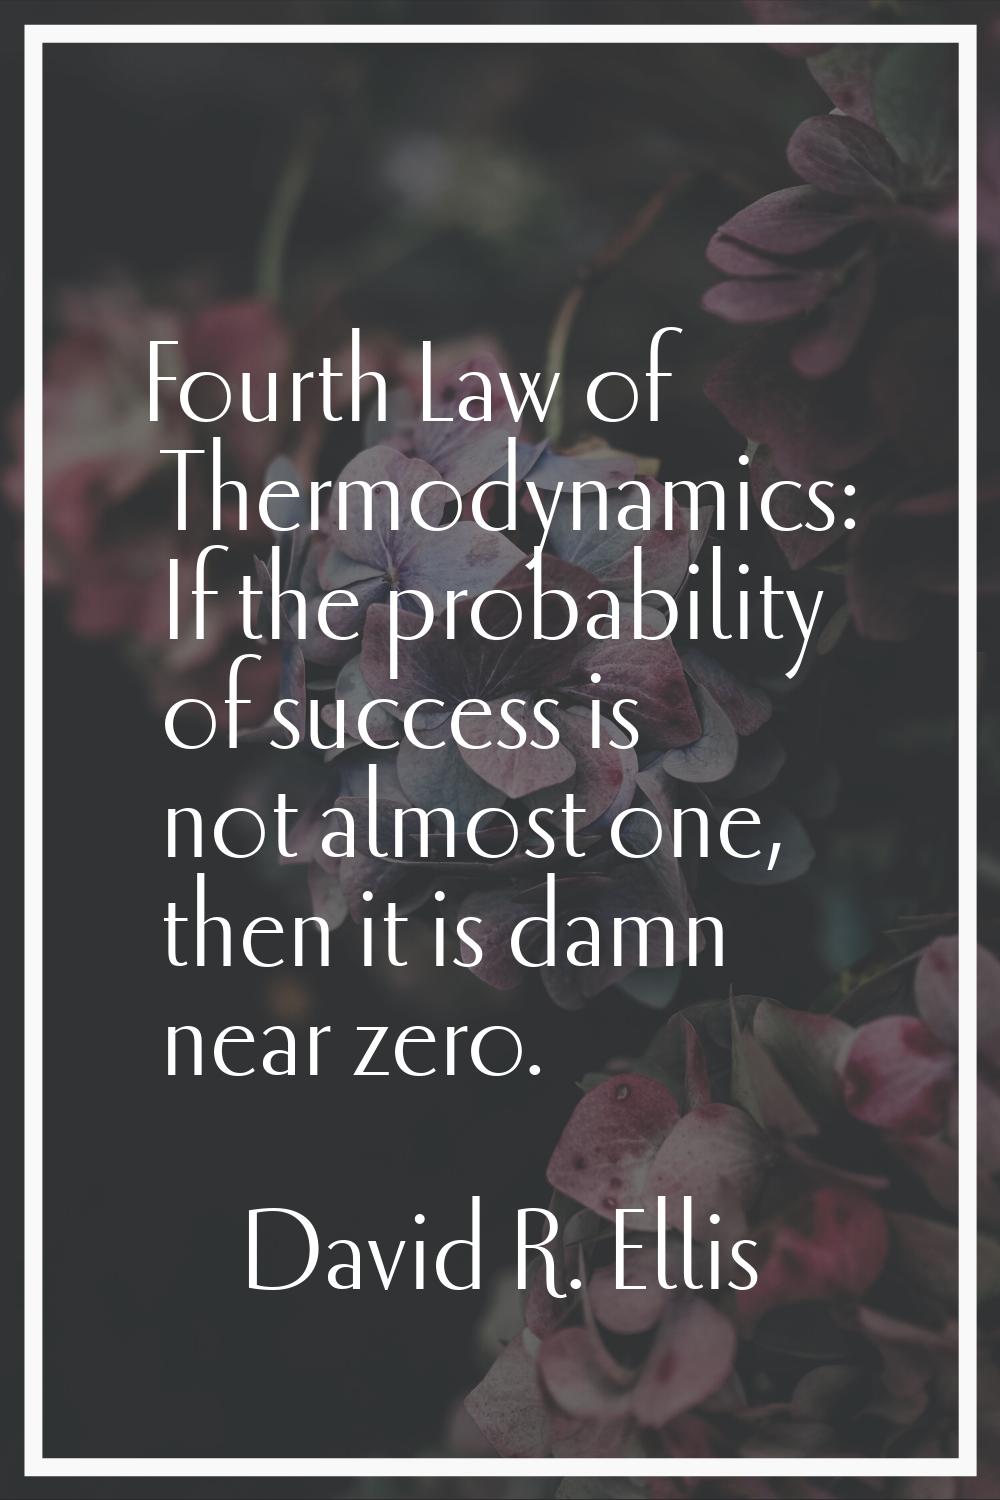 Fourth Law of Thermodynamics: If the probability of success is not almost one, then it is damn near